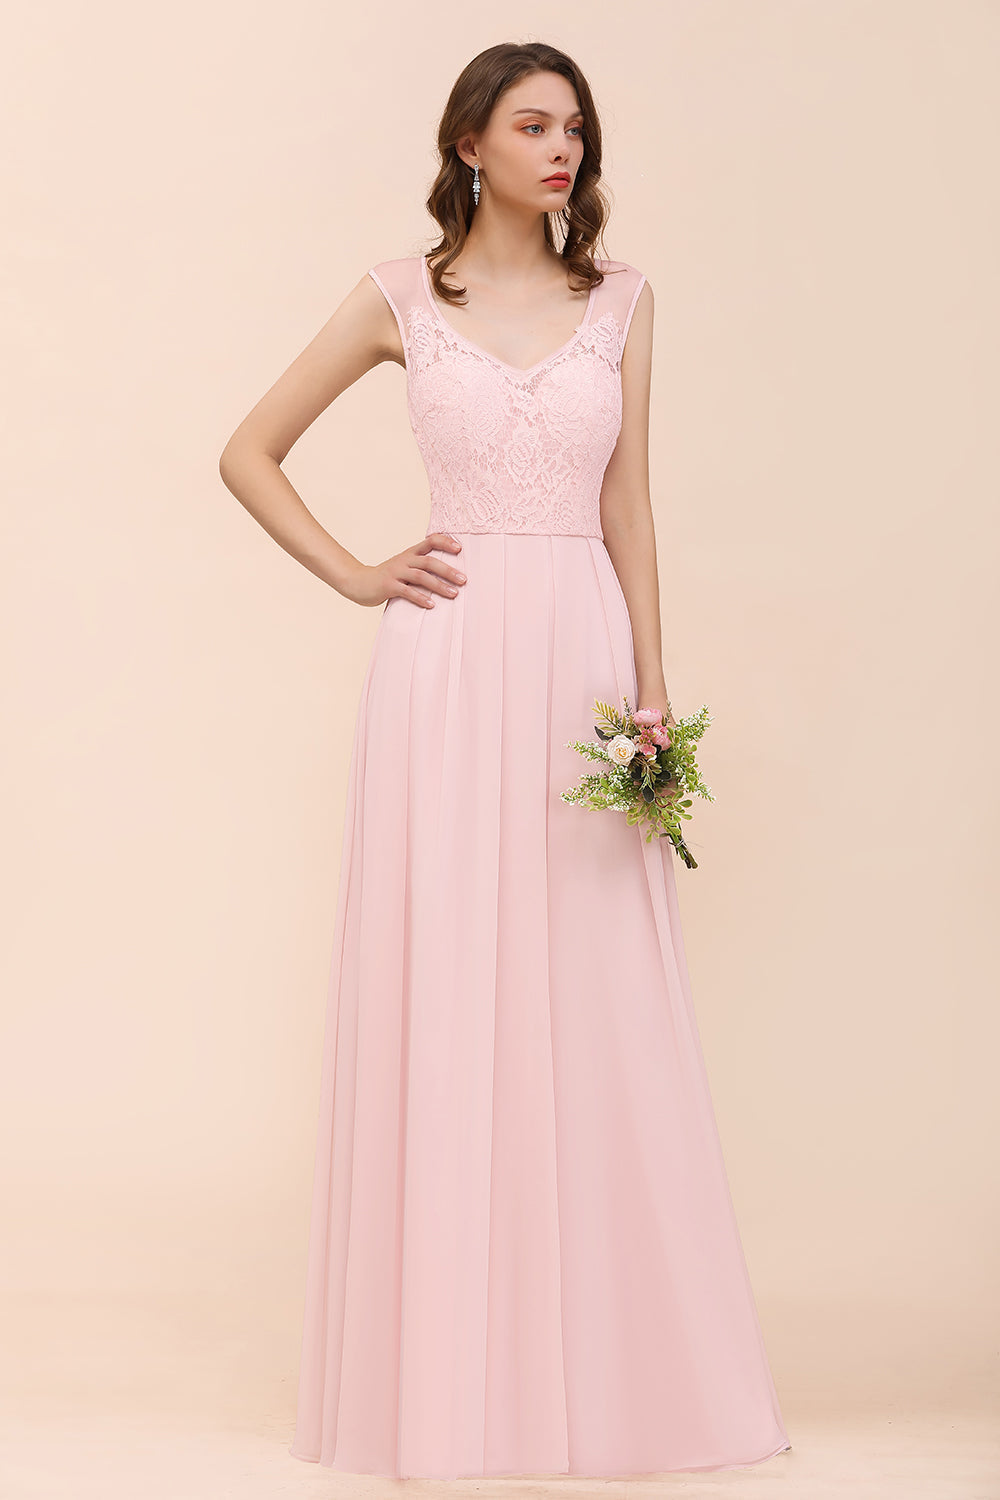 Load image into Gallery viewer, Elegant Pink Lace Straps Ruffle Affordable Bridesmaid Dress-27dress
